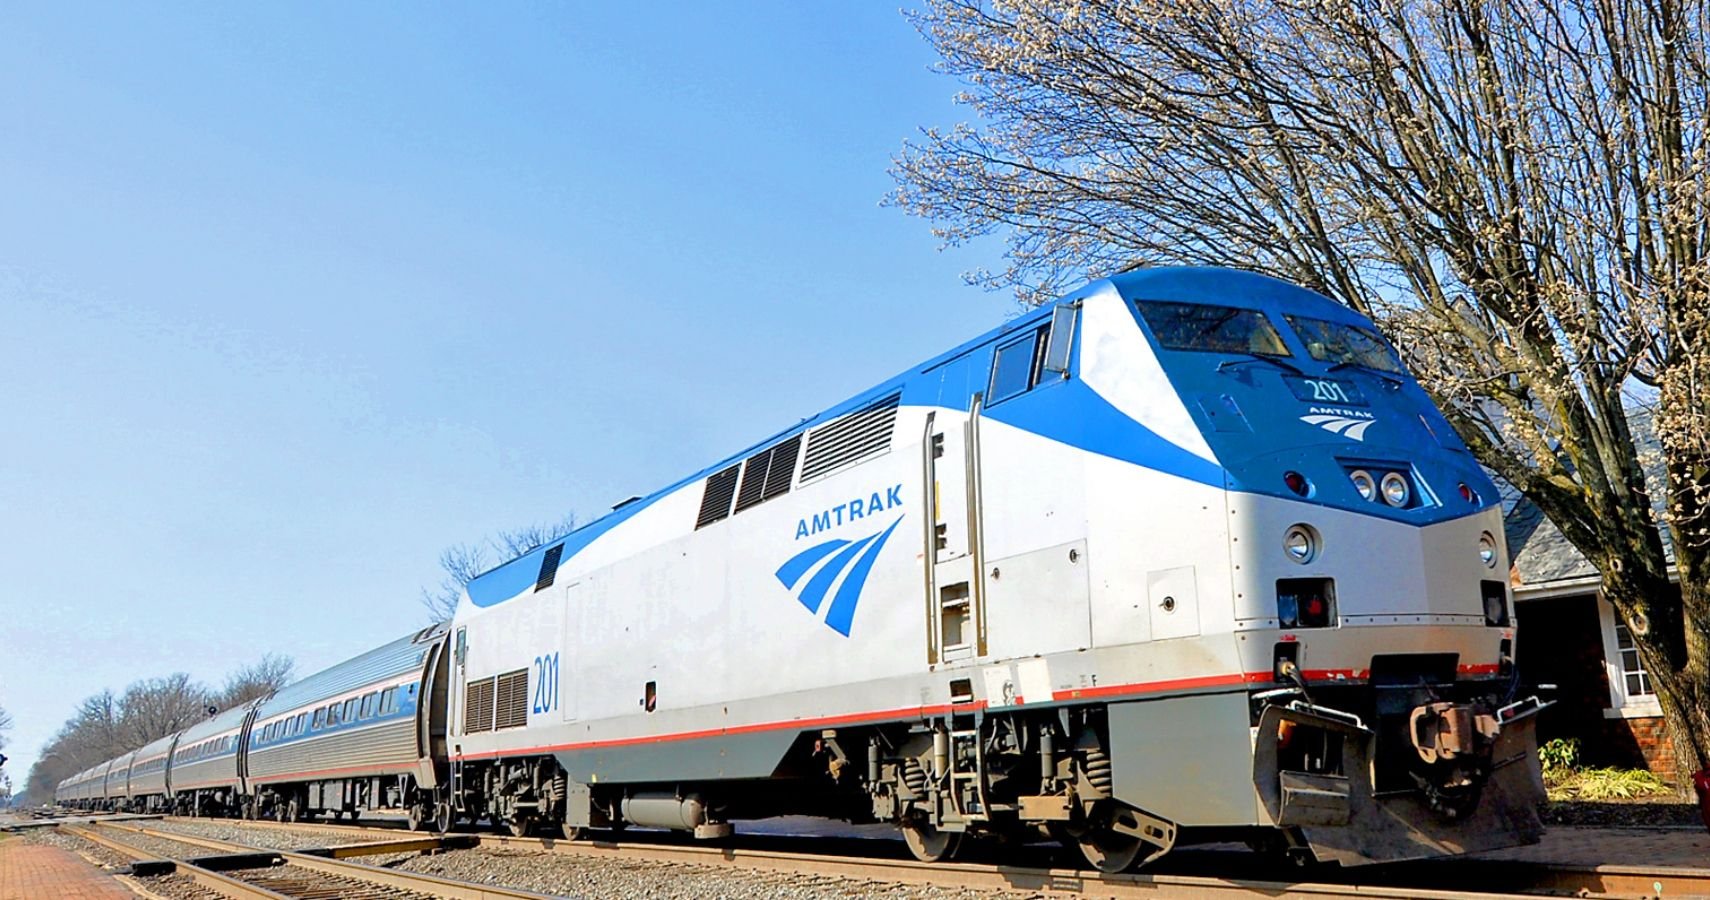 10 Passenger Train Secrets Guests Didn’t Know About